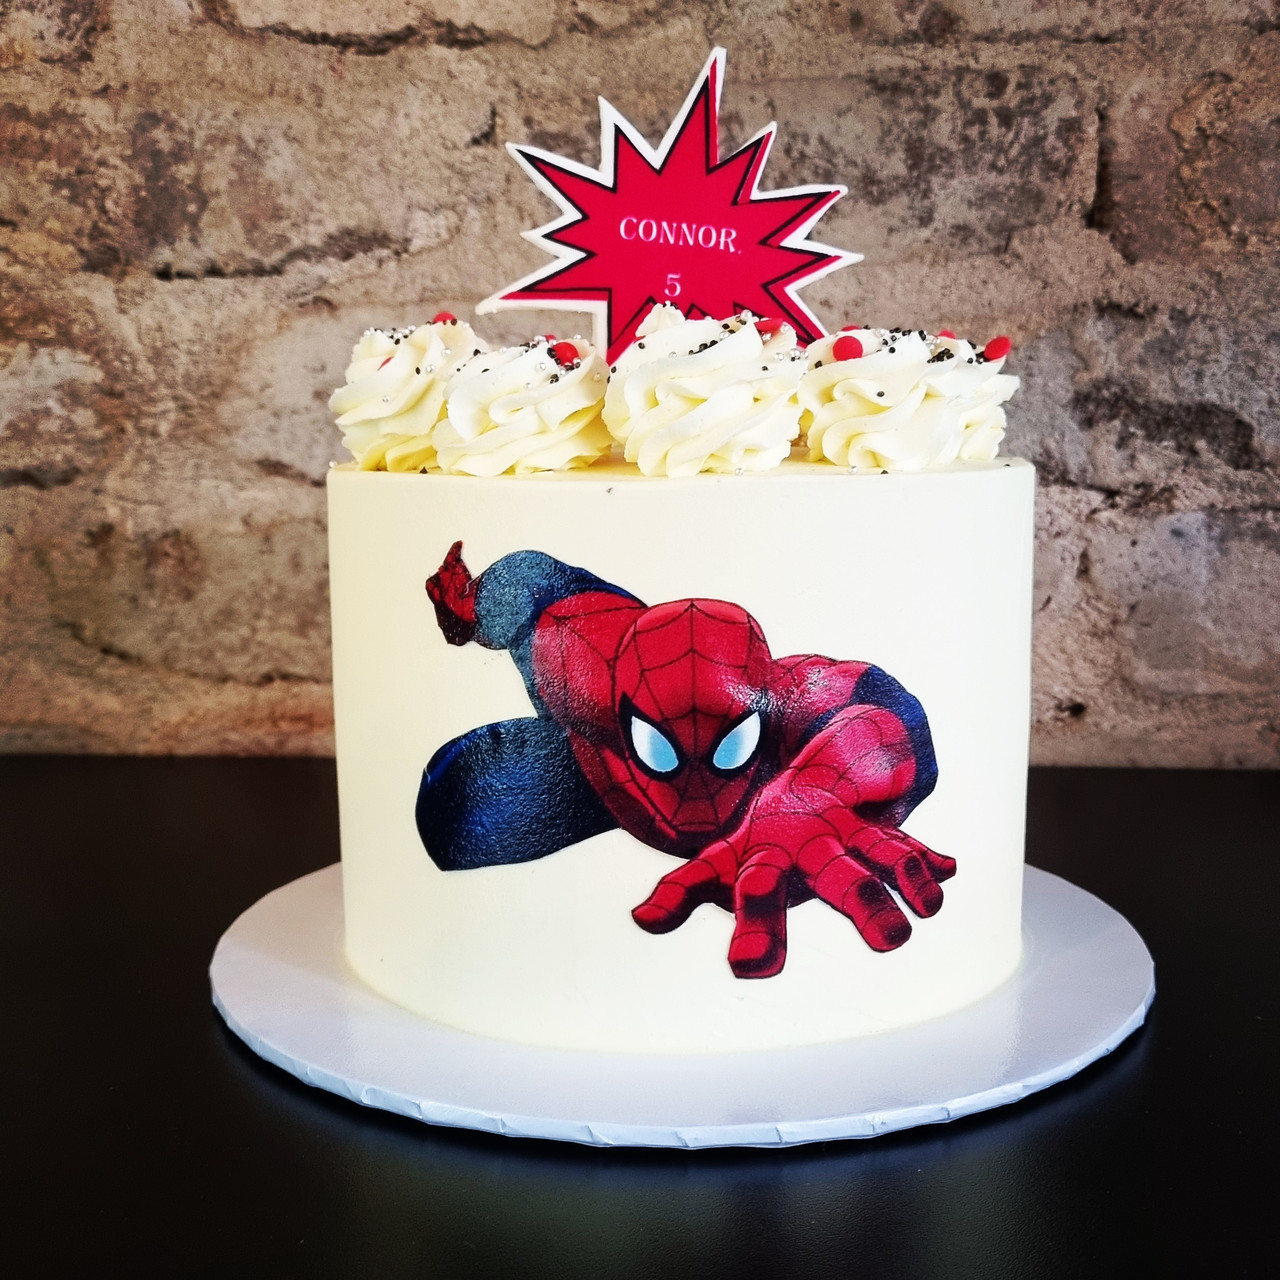 15 Spiderman Cake Ideas That Are a Must For a Superhero Birthday